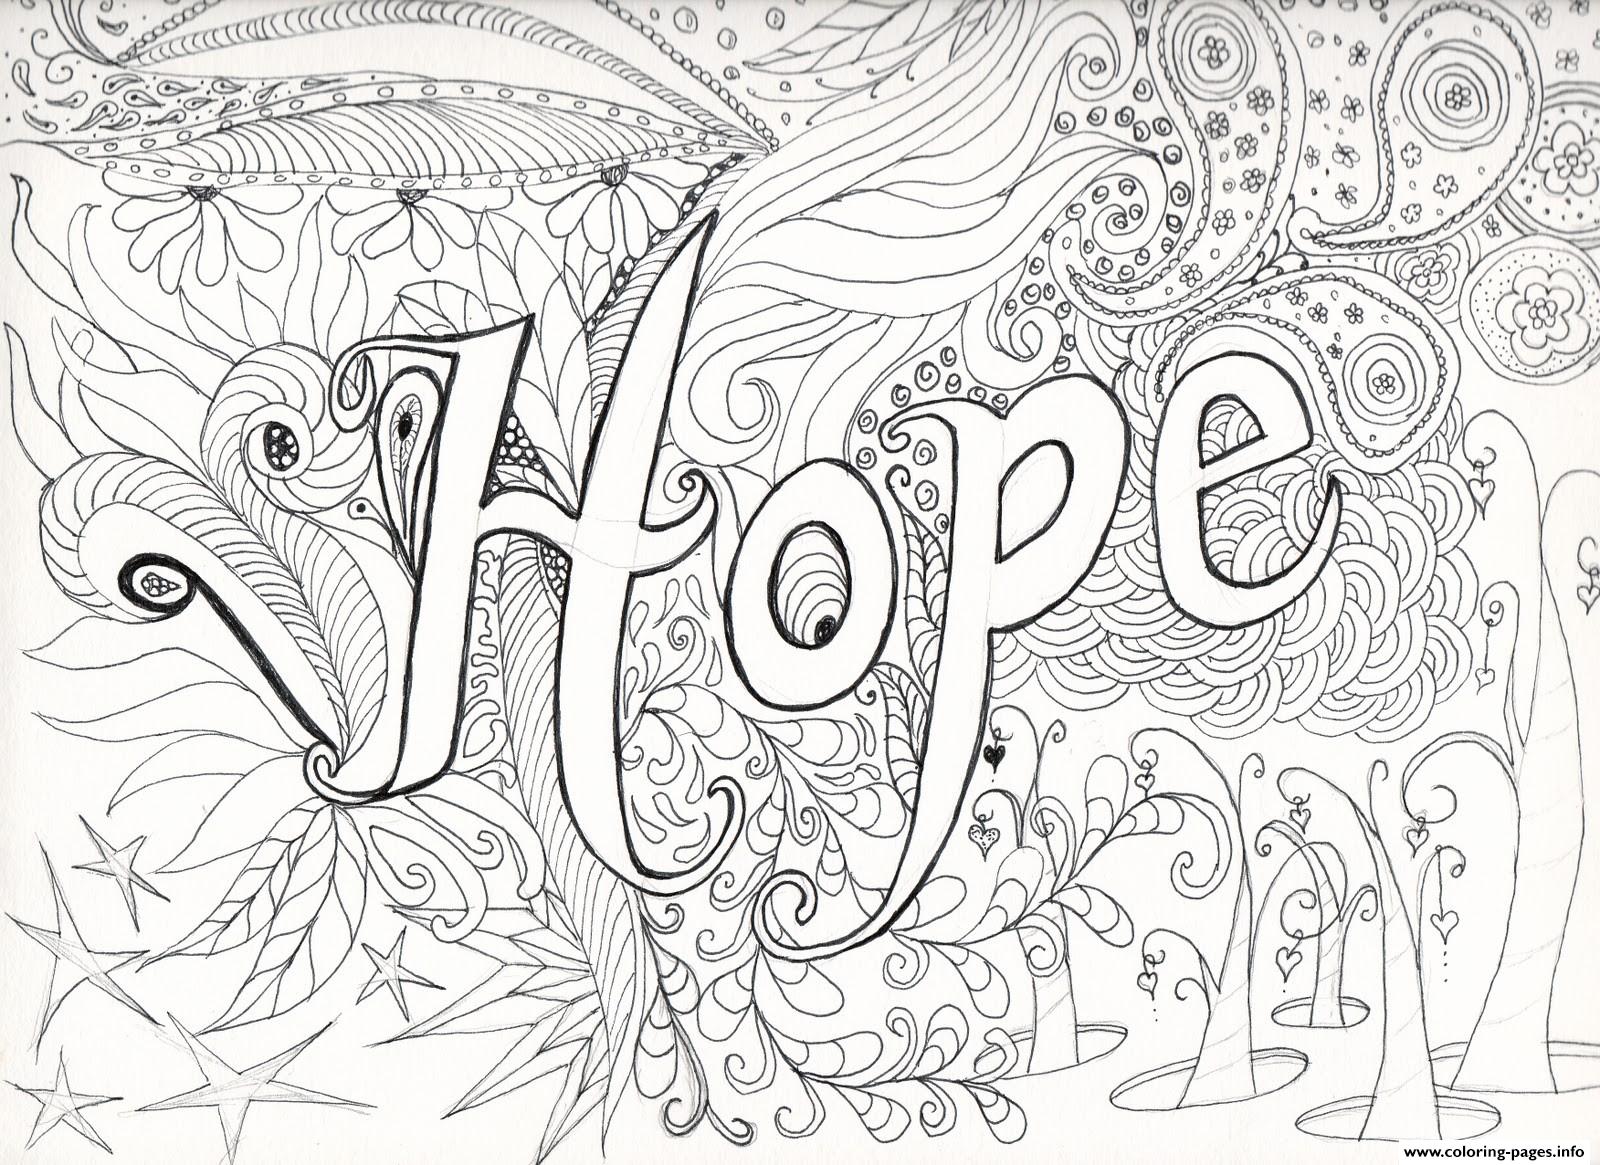 Advanced Difficult Hard Hope Message Adult Coloring Pages ...